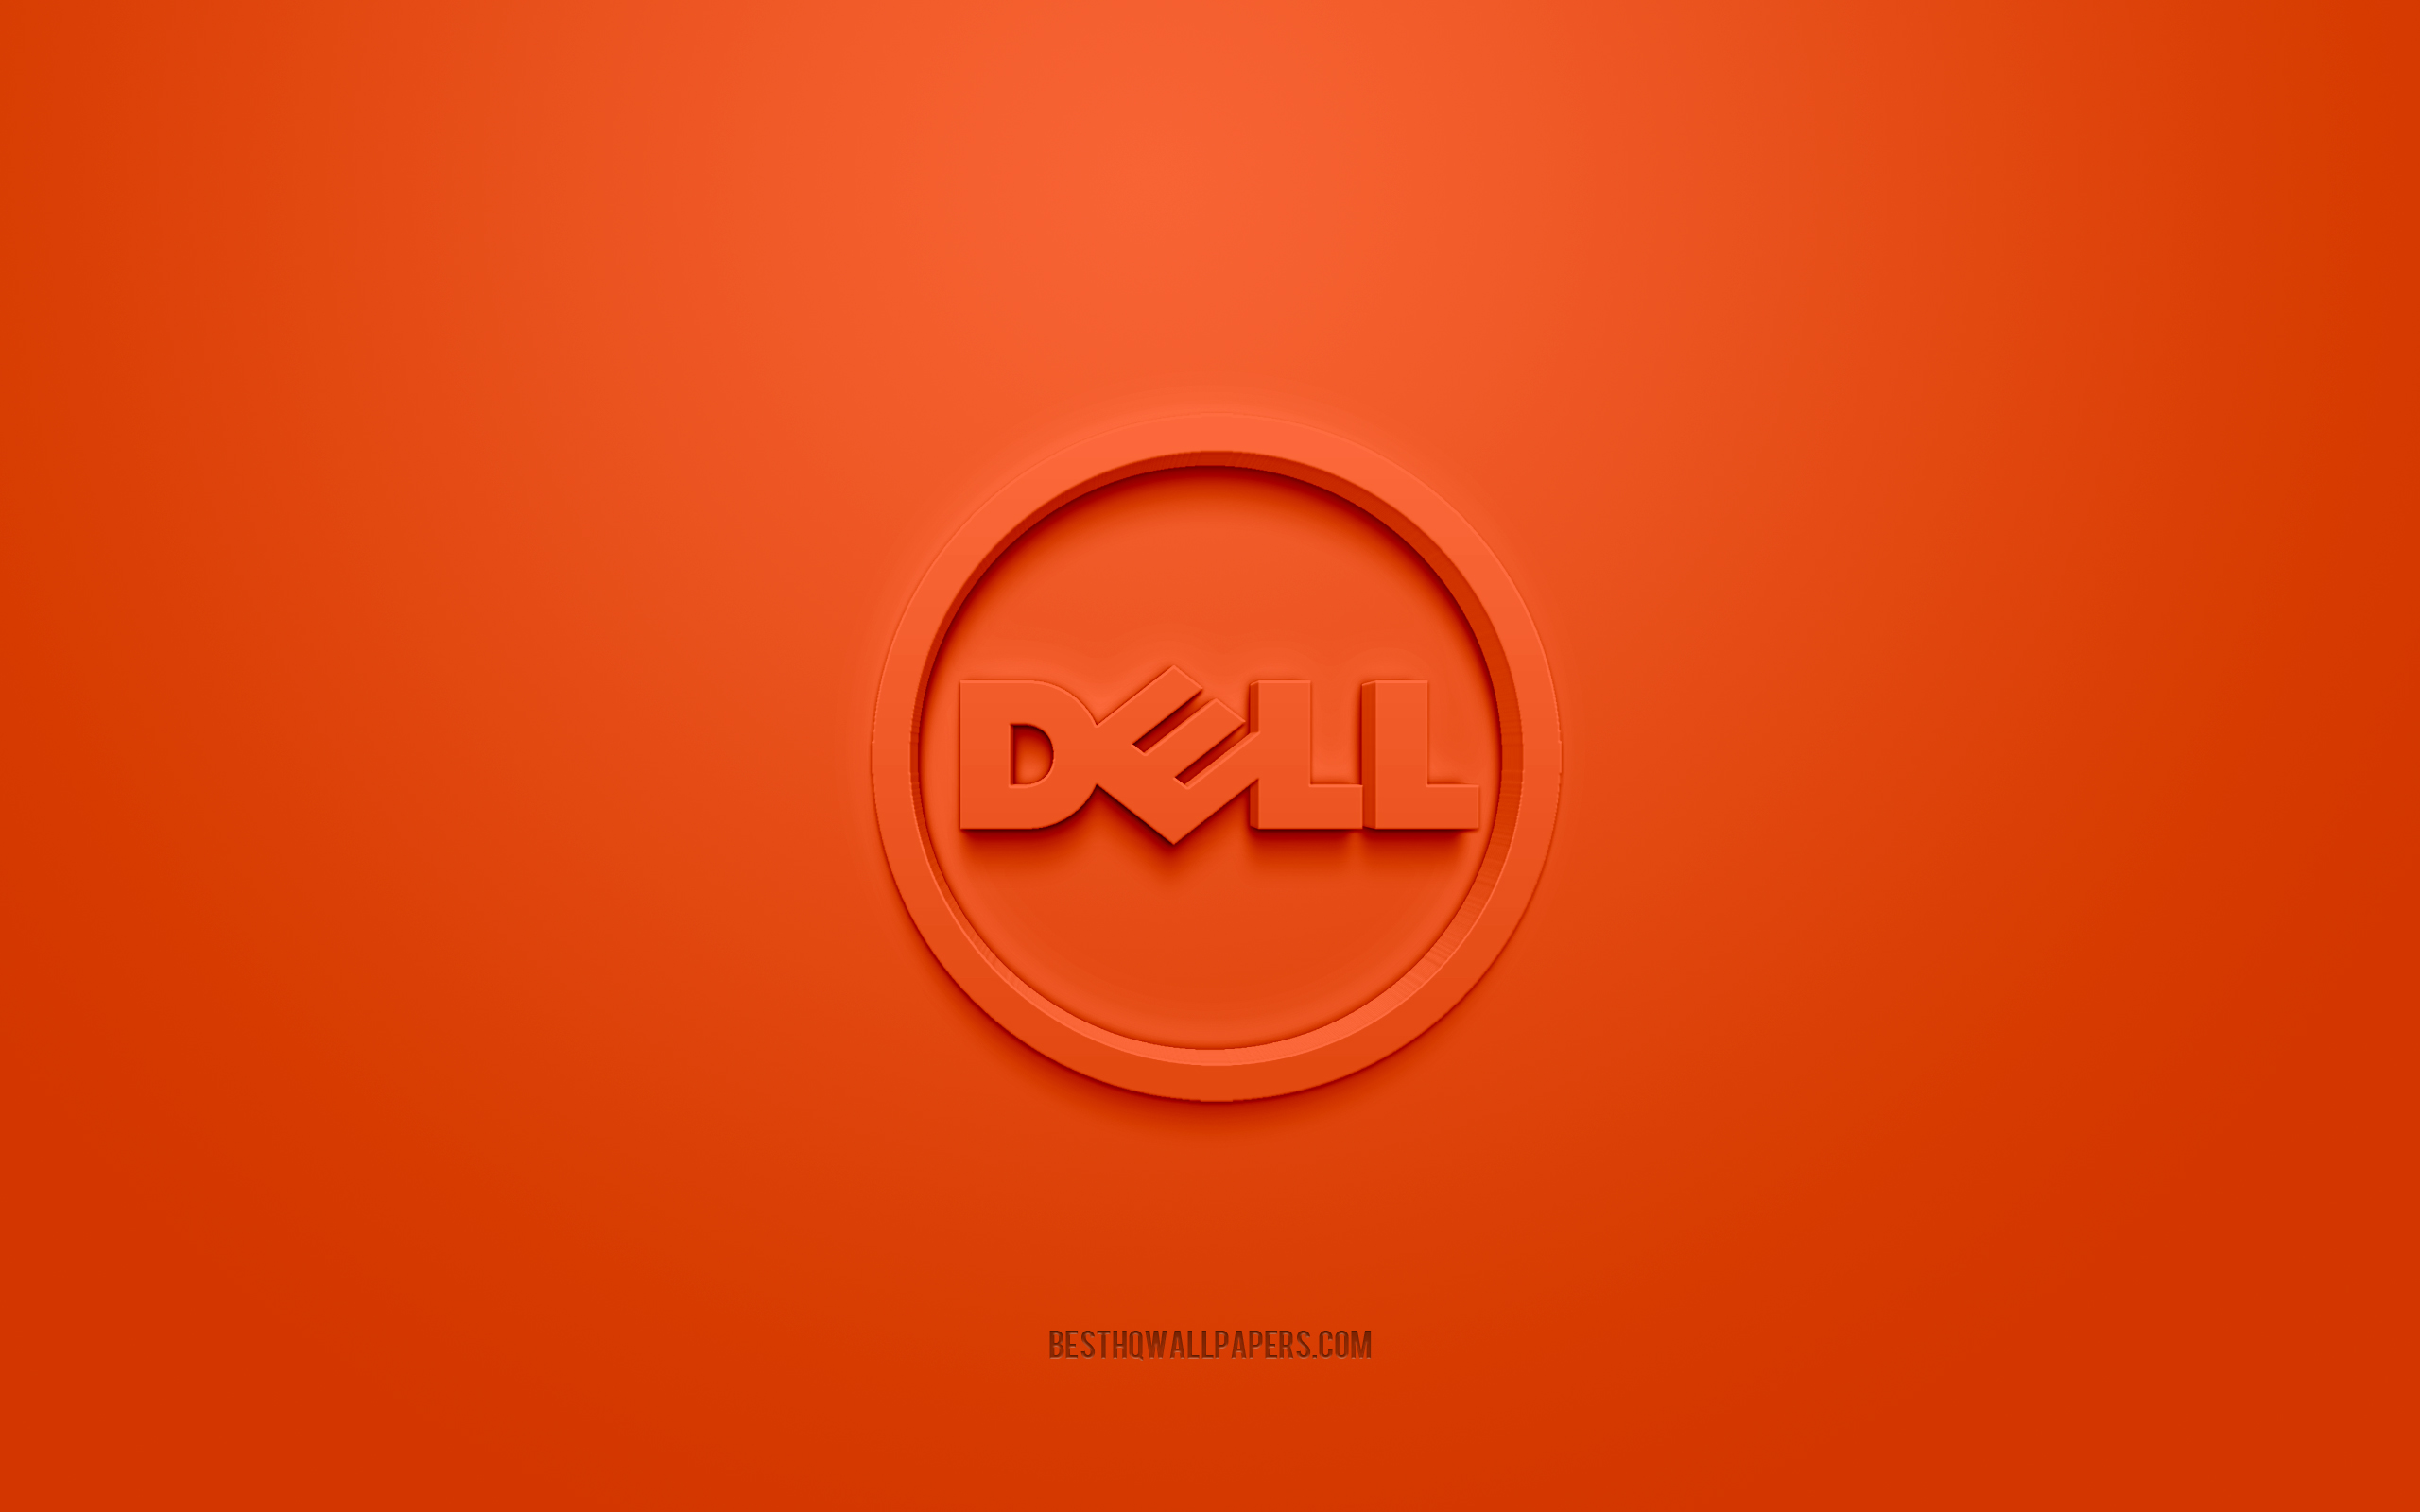 Download wallpaper Dell round logo, orange background, Dell 3D logo, 3D art, Dell, brands logo, Dell logo, orange 3D Dell logo for desktop with resolution 2560x1600. High Quality HD picture wallpaper